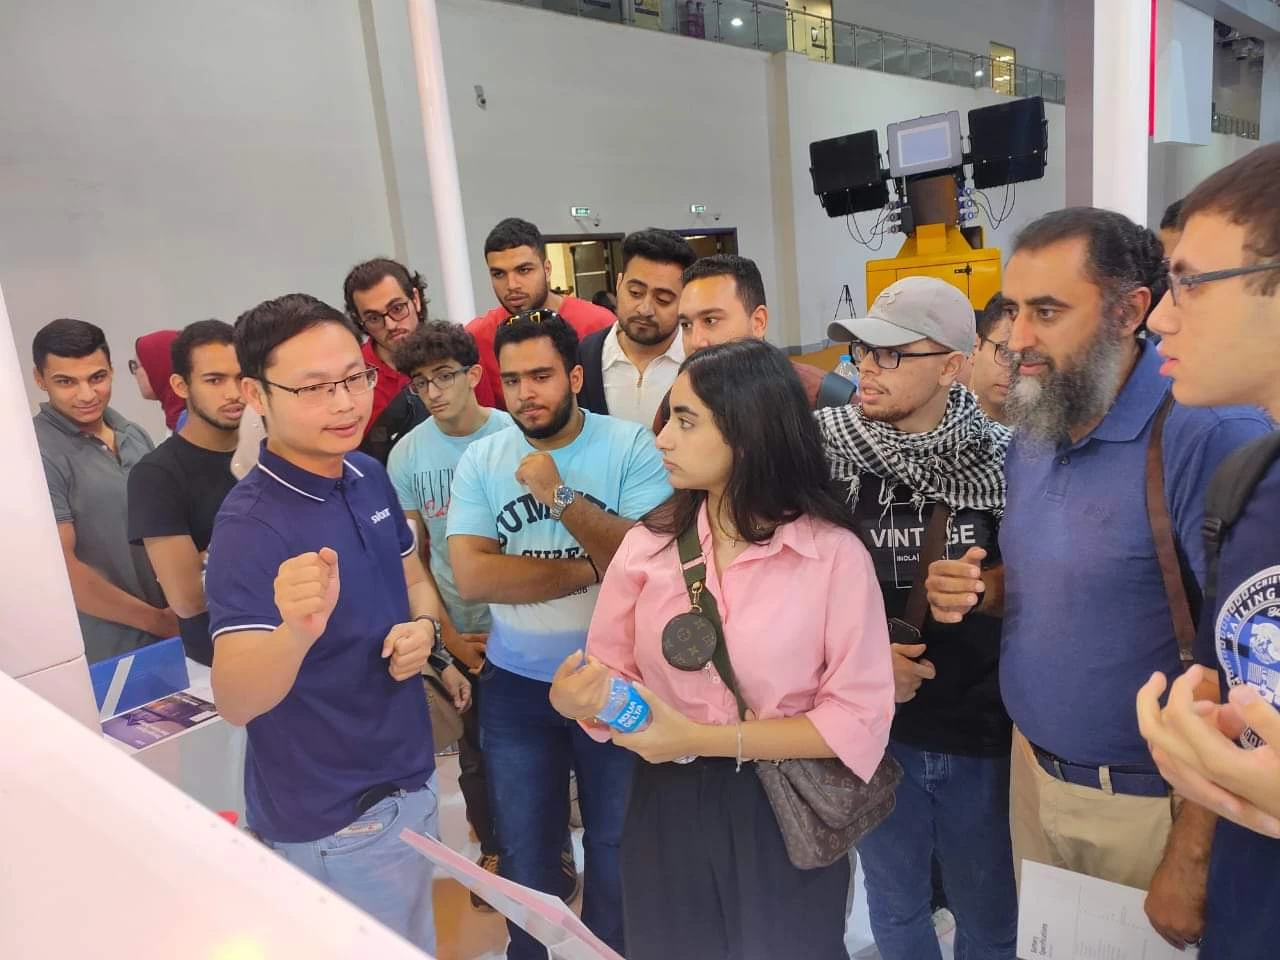 The Department of Cultural and Social Activity in Abu Qir organized a scientific trip for students, in cooperation with the Department of Electricity and Control, to the ENERGY EGYPT exhibition at the fairgrounds on 10/31/2023.4